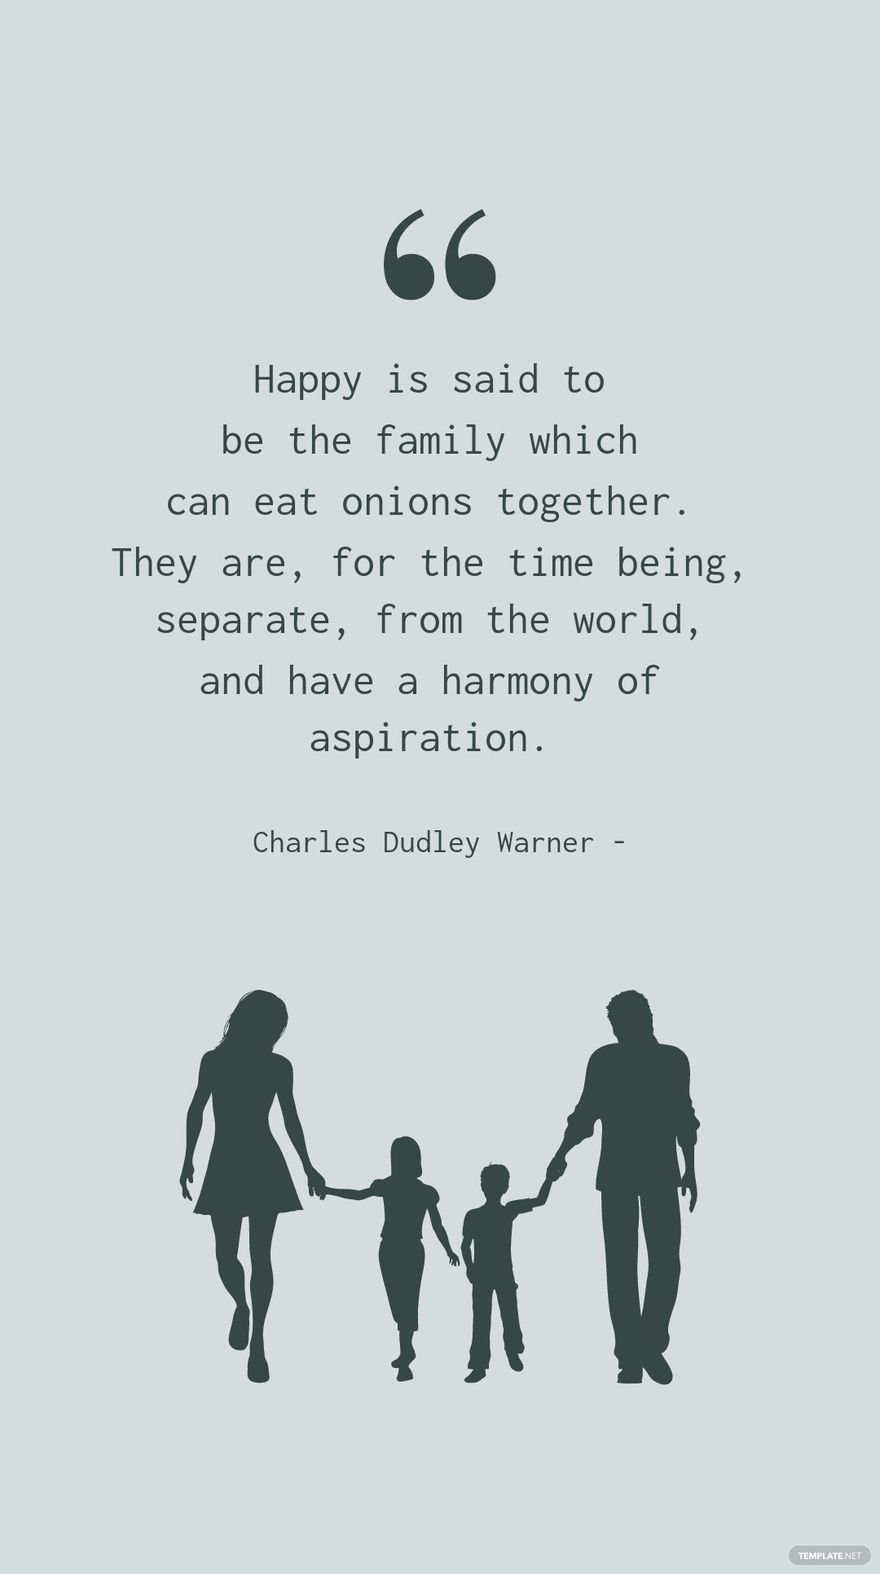 Charles Dudley Warner - Happy is said to be the family which can eat onions together. They are, for the time being, separate, from the world, and have a harmony of aspiration.